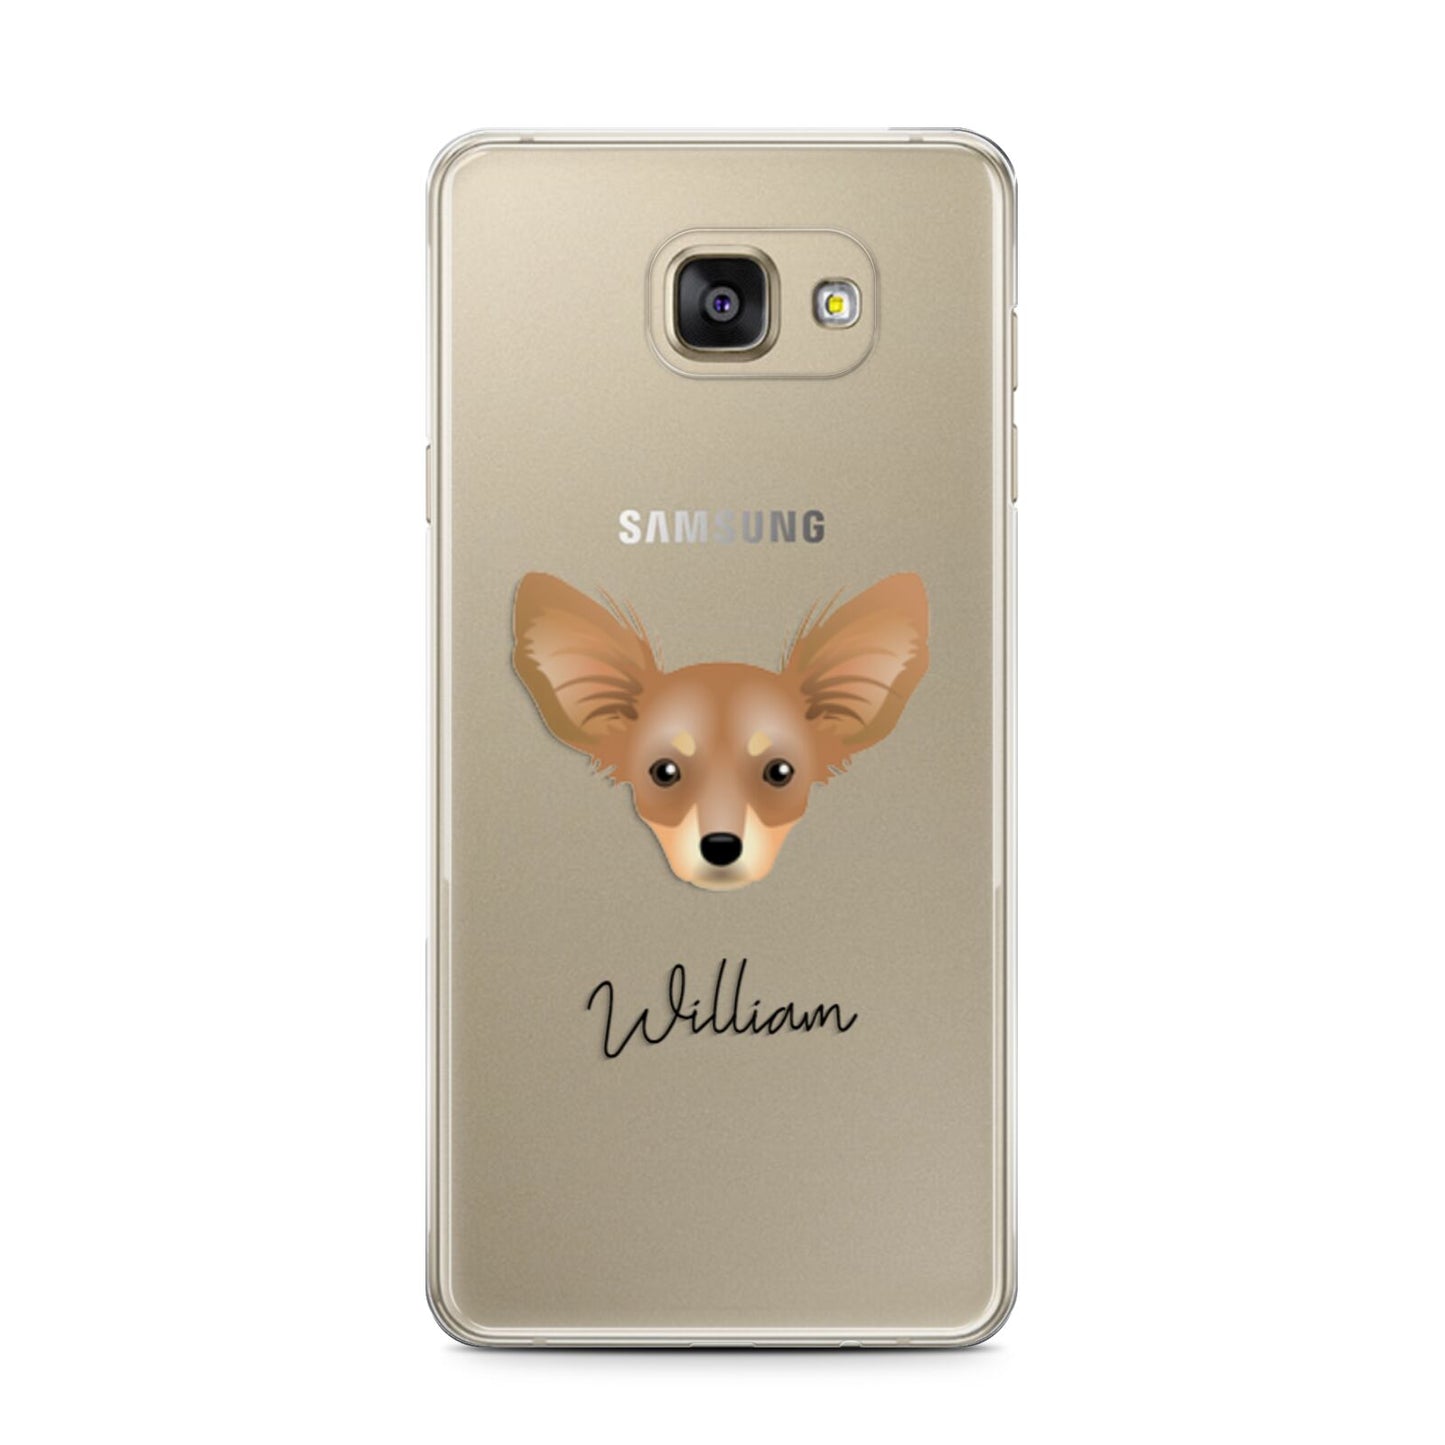 Russian Toy Personalised Samsung Galaxy A7 2016 Case on gold phone